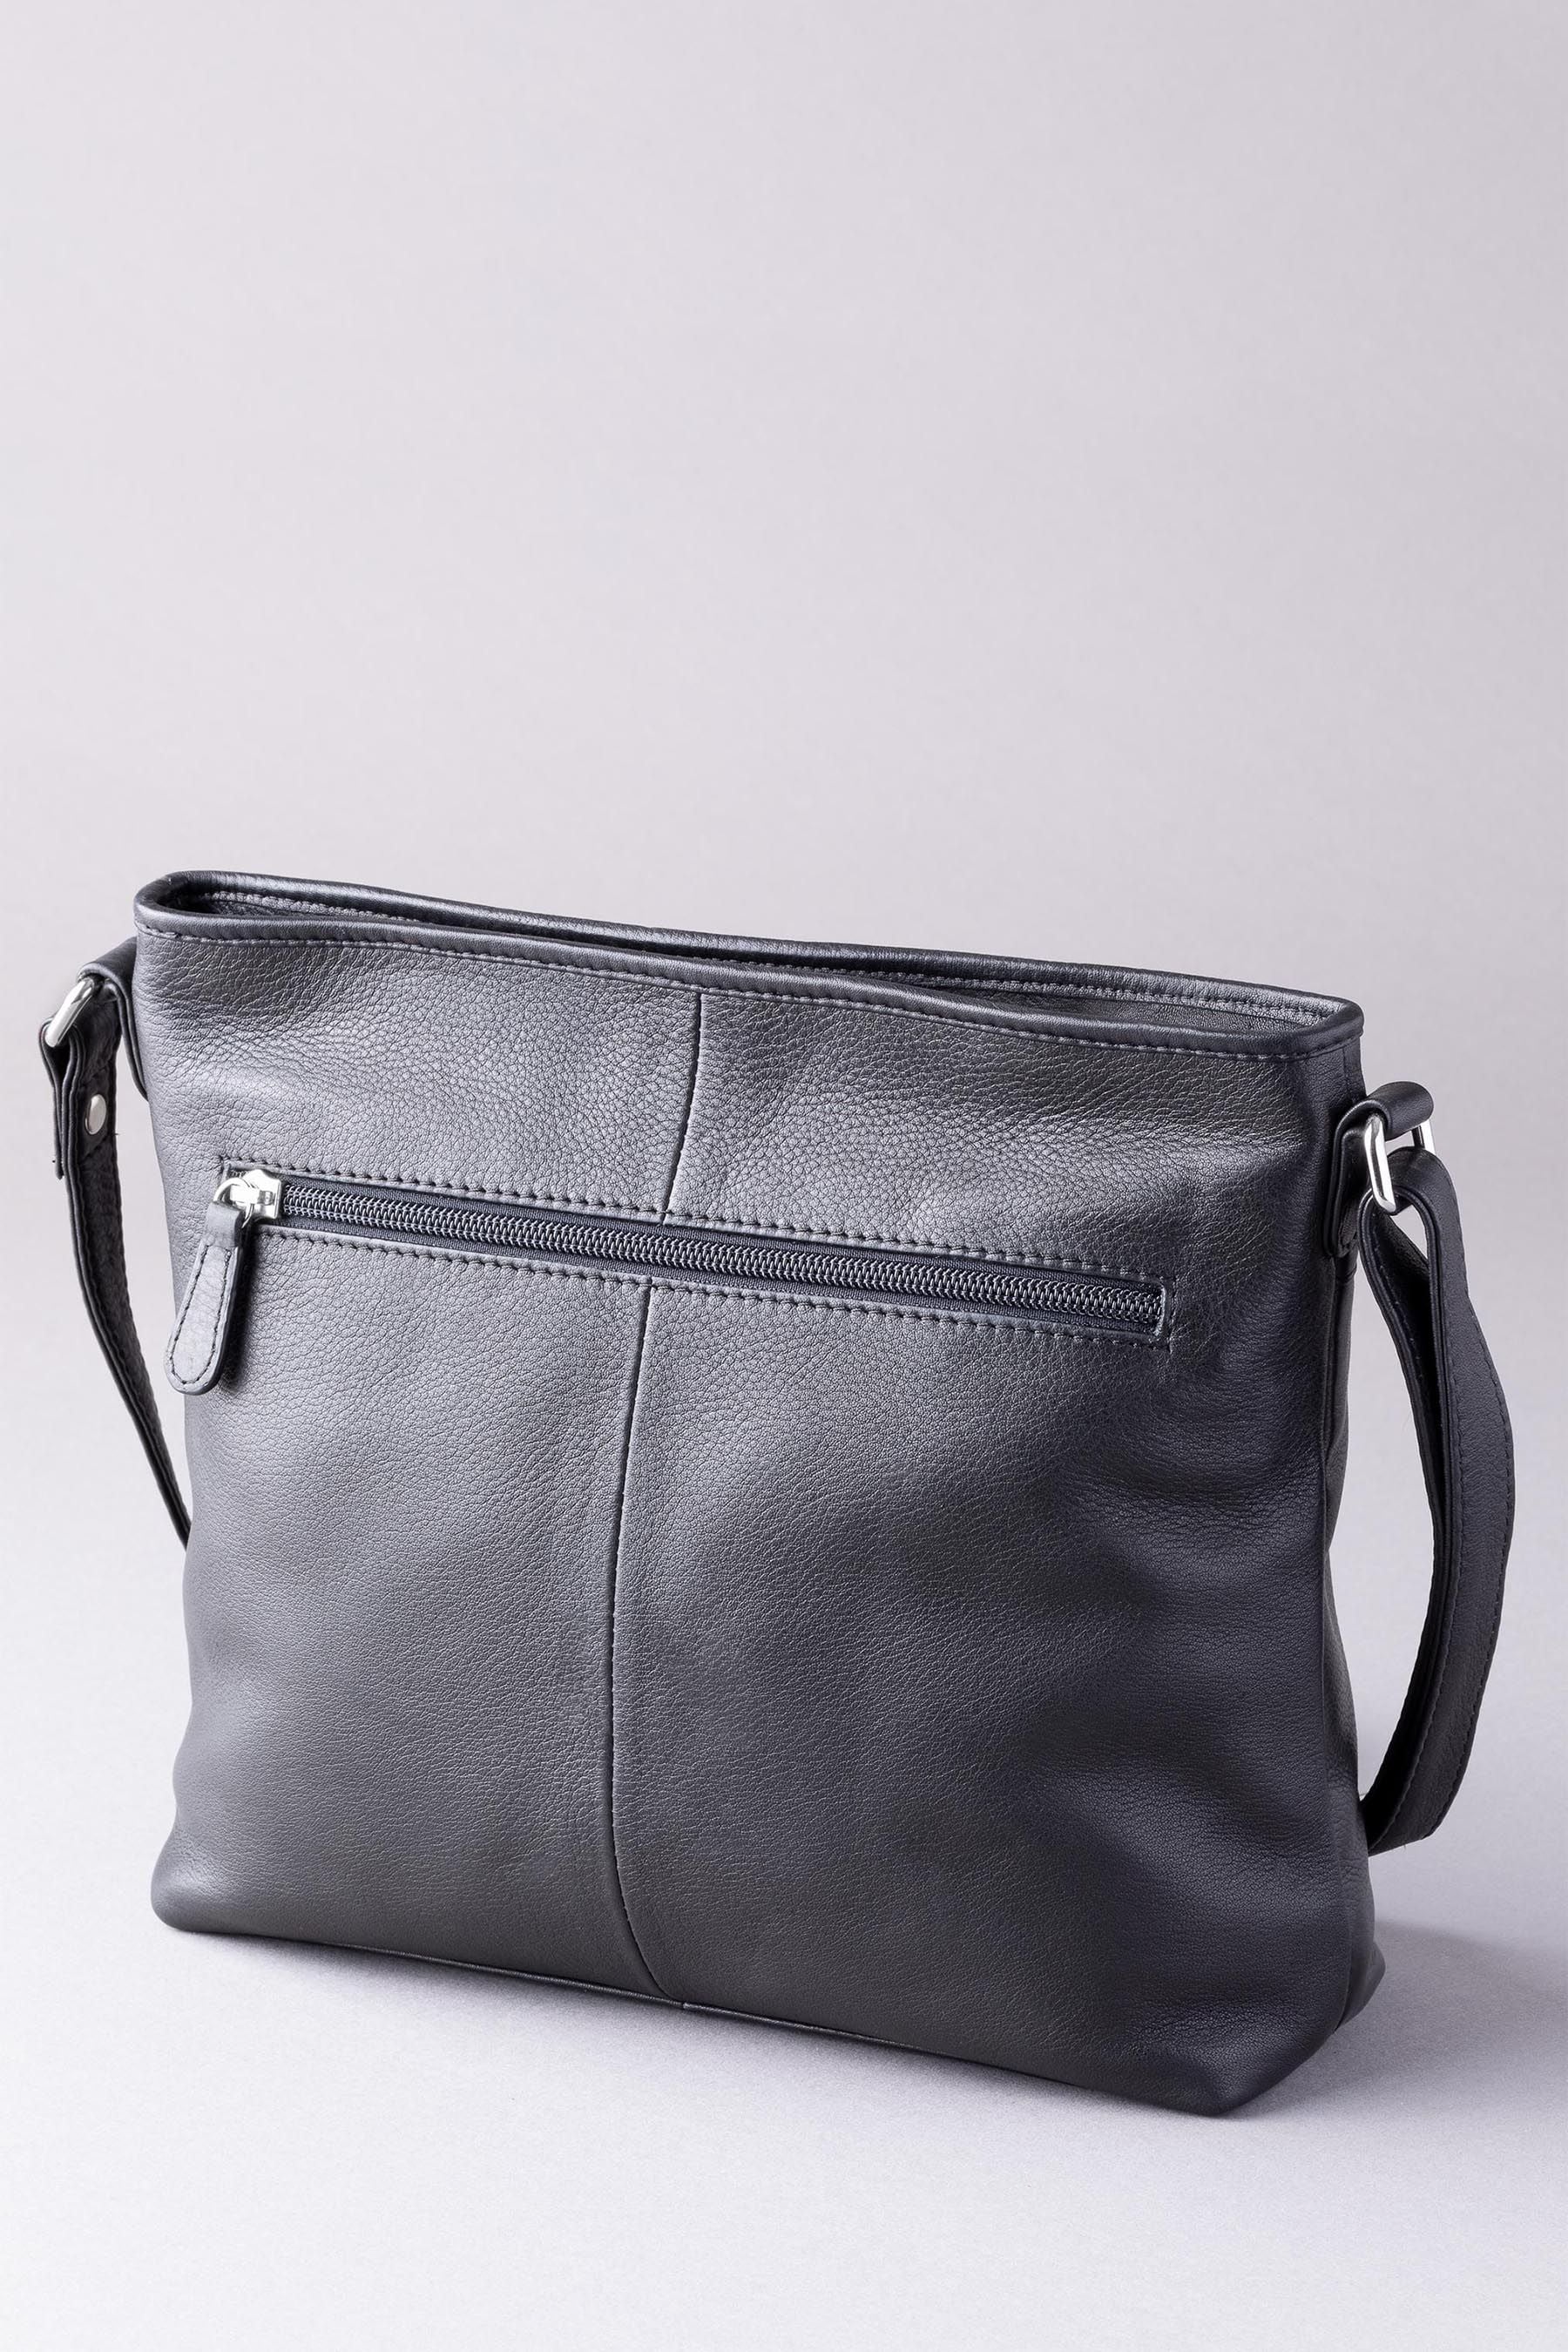 Buy Lakeland Leather Farlam Leather Cross-Body Bag from Next Ireland